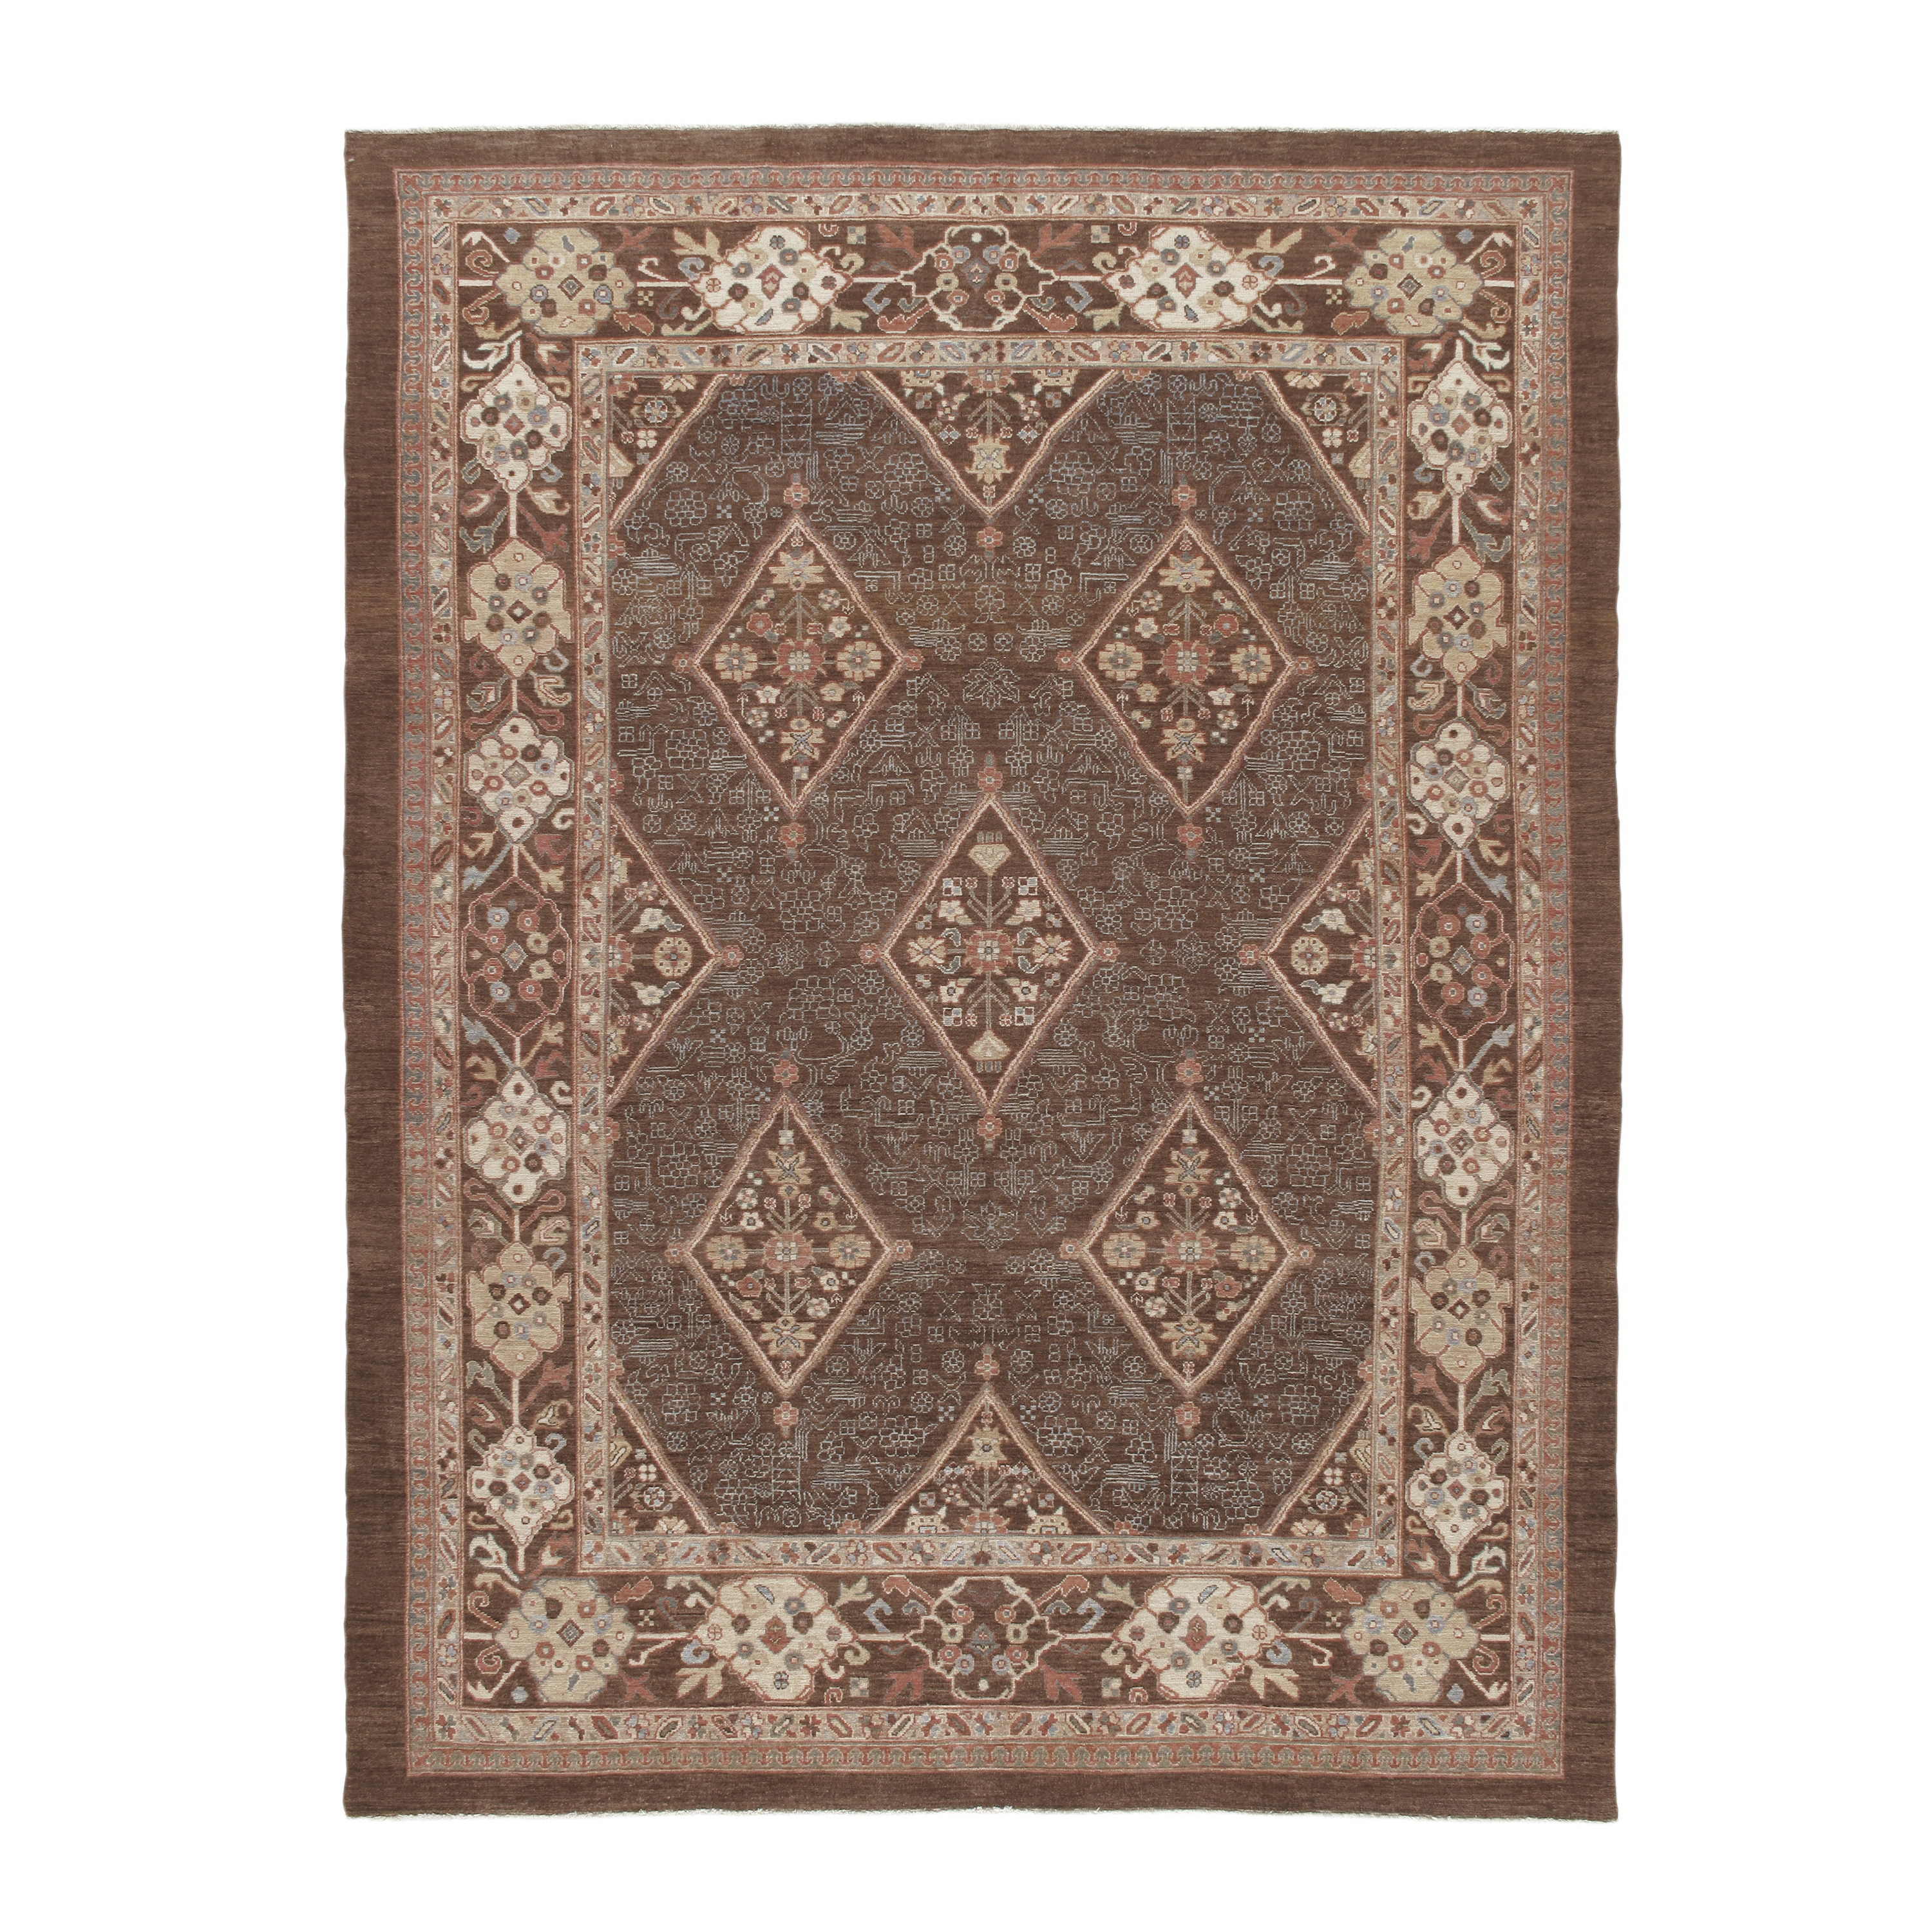 This Kurdish rug is crafted with durable and all natural material.